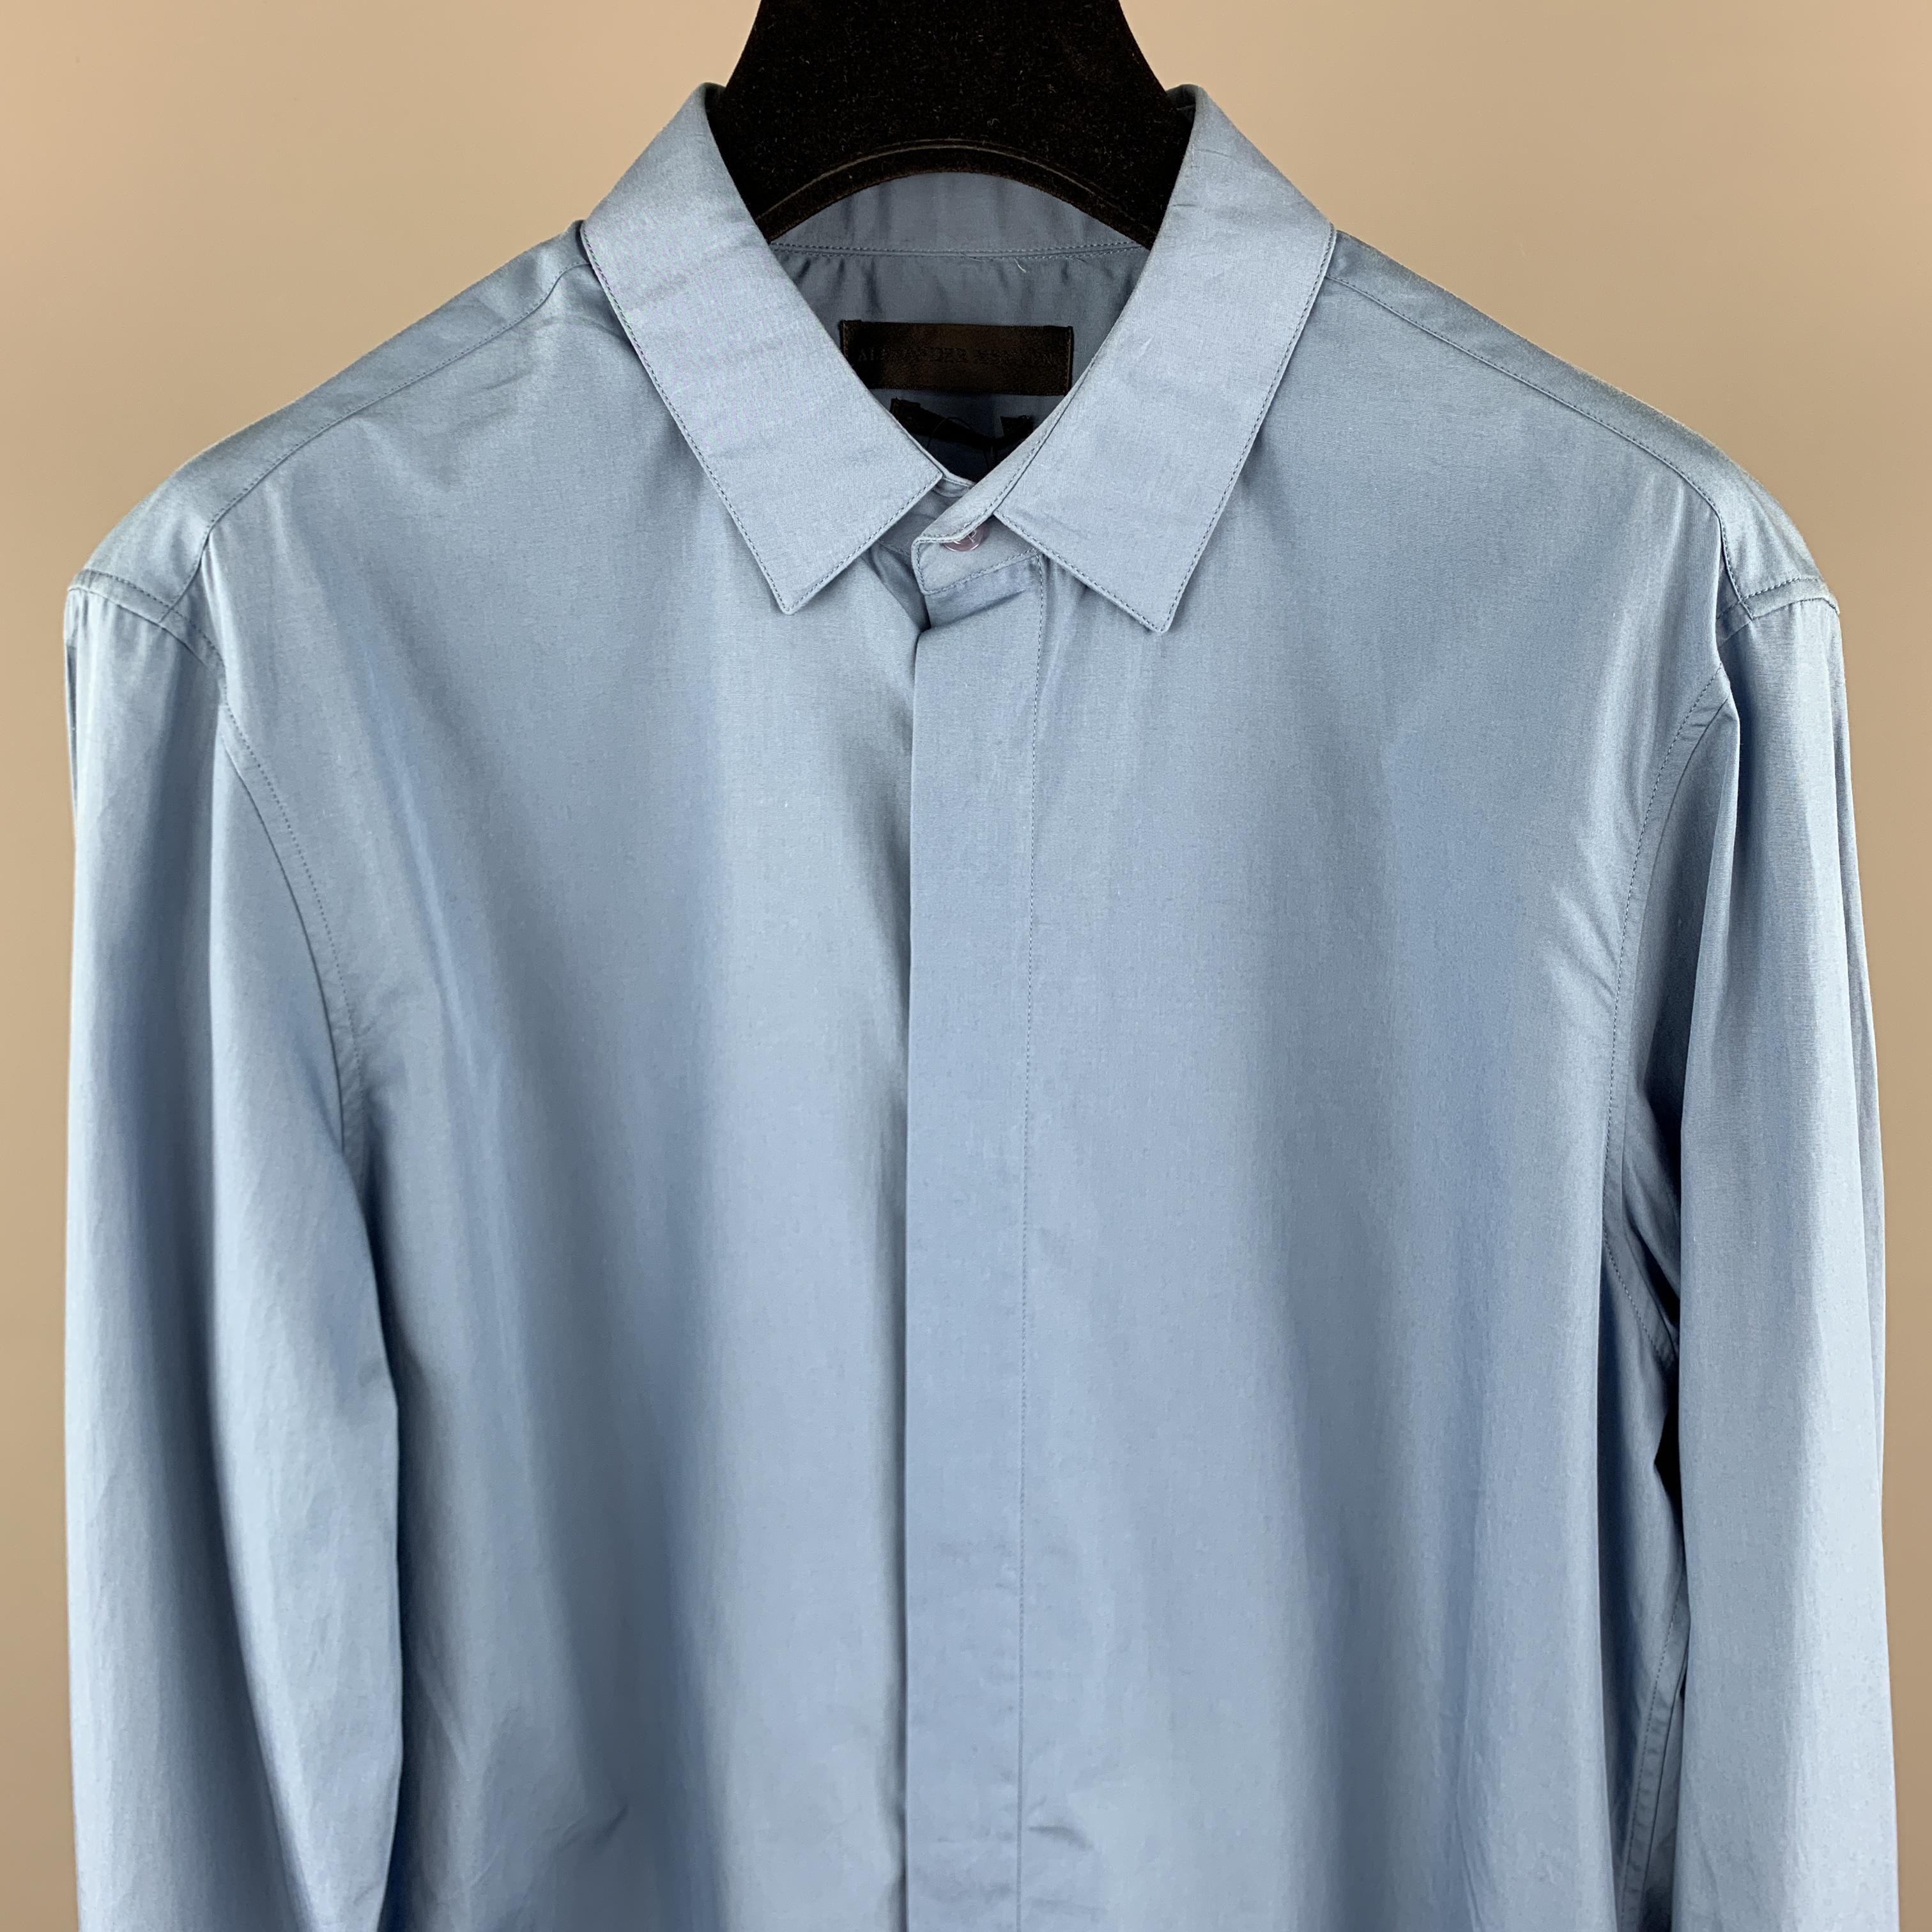 ALEXANDER MCQUEEN Long Sleeve Shirt comes in a blue cotton featuring a button up style with a hidden button closure. Made in Italy.

New With Tags. 
Marked: 46

Measurements:

Shoulder: 15.5 in. 
Chest: 36 in.
Sleeve: 27 in. 
Length: 32 in. 